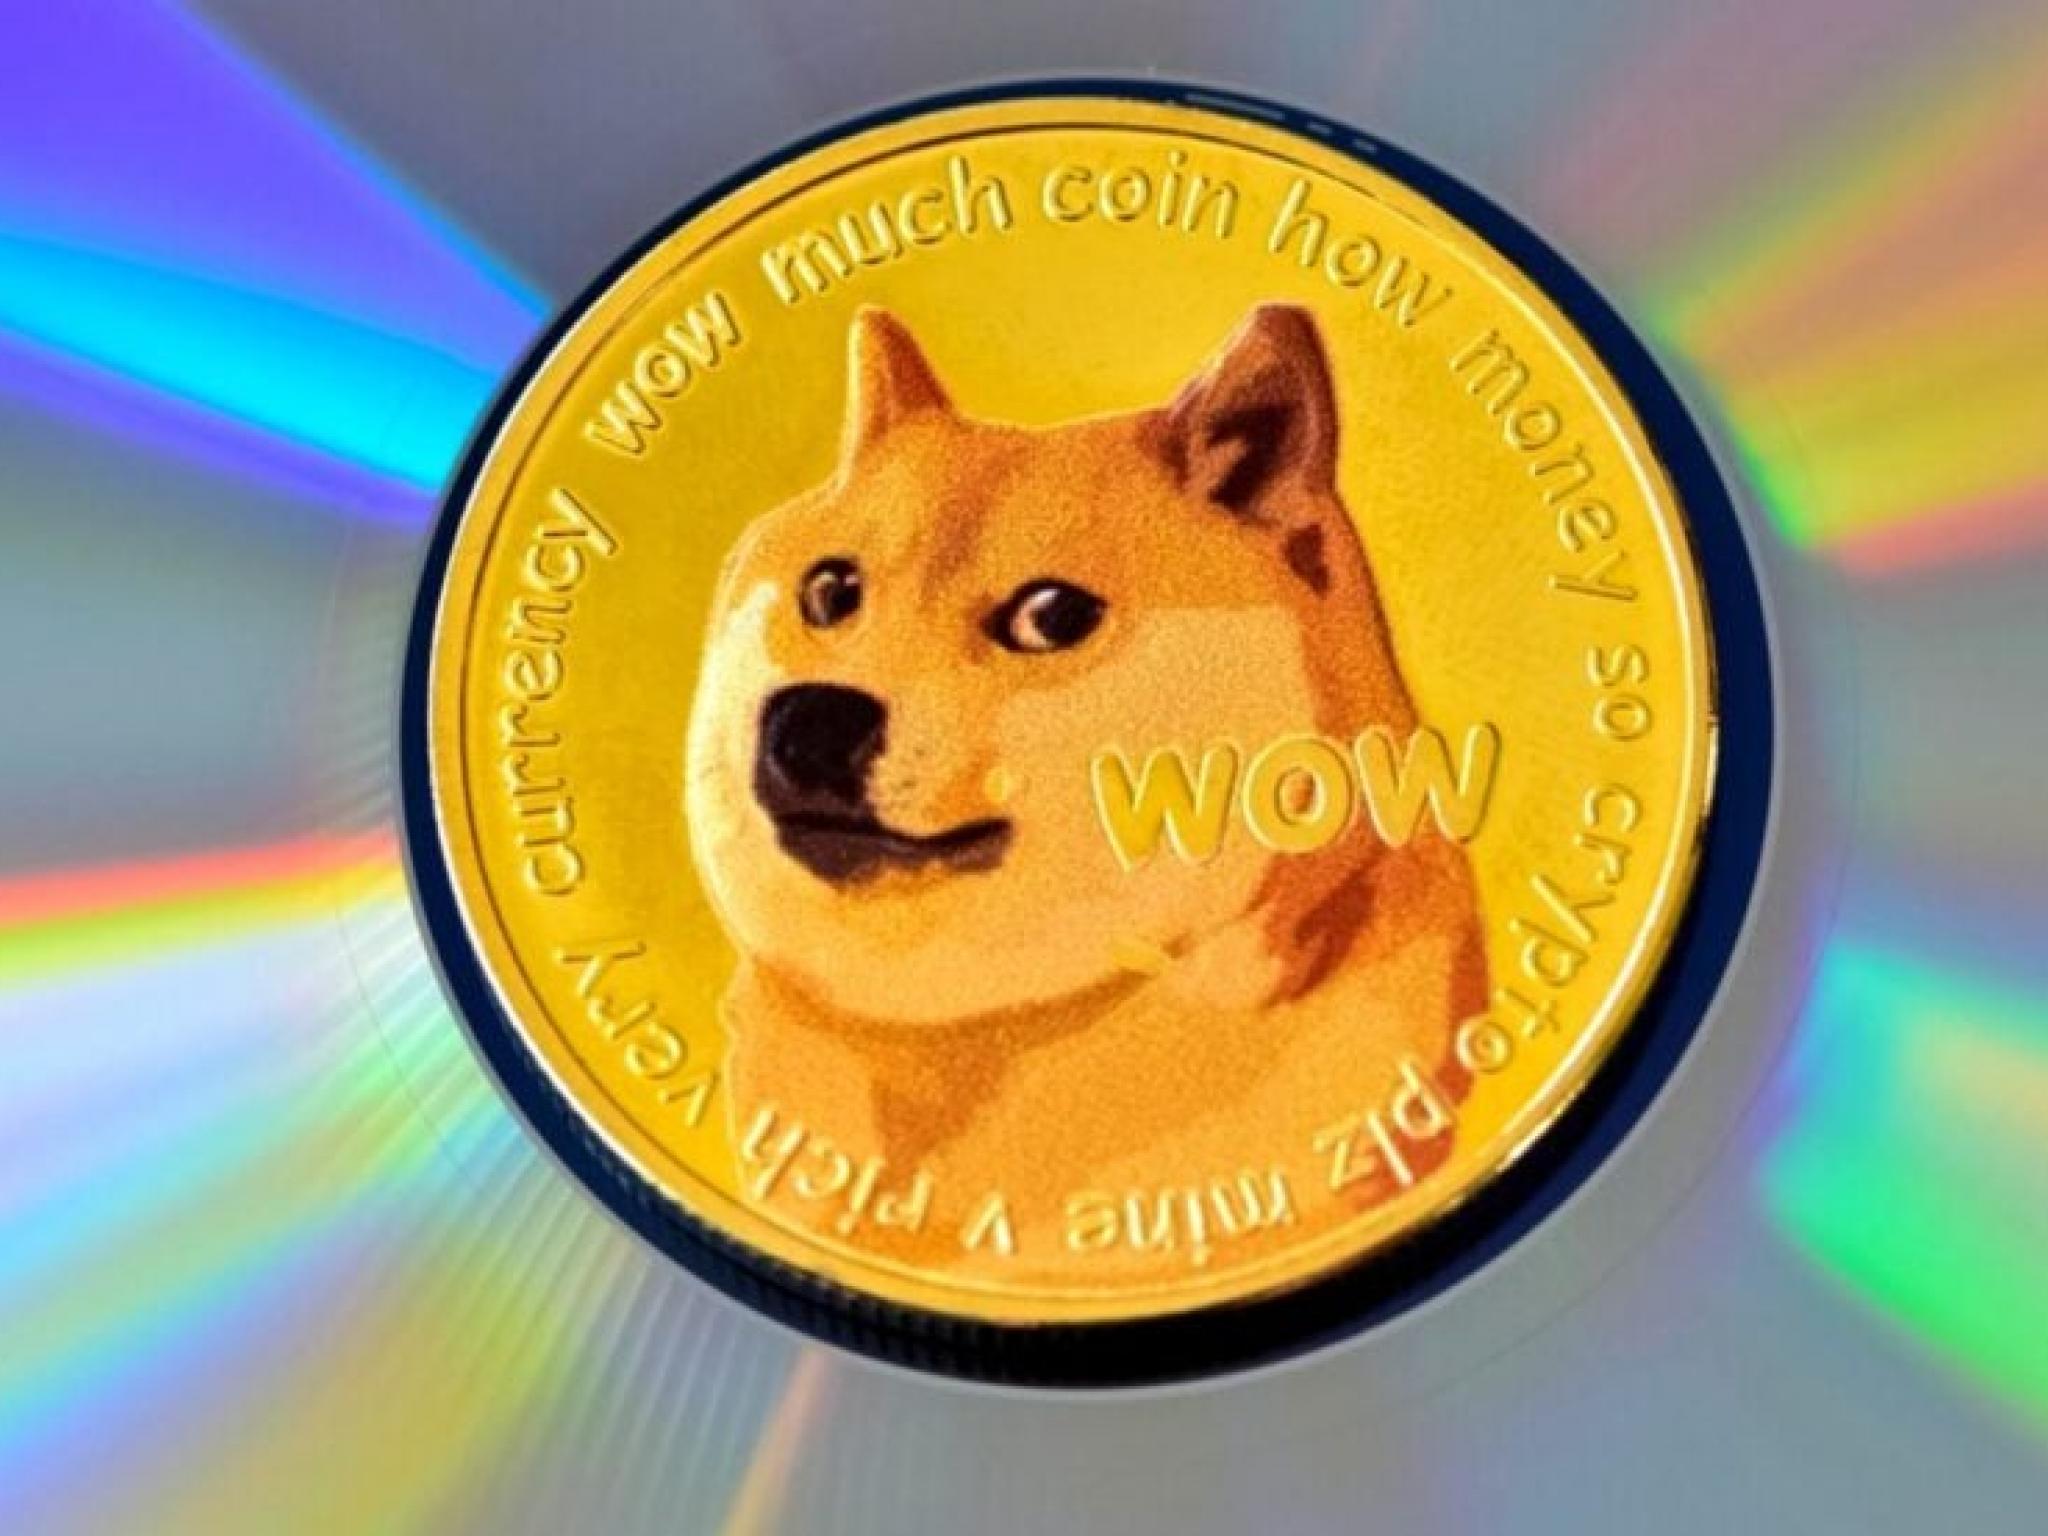  dogecoins-23-monthly-gains-steels-traders-insanely-high-conviction-doge-will-outpace-bitcoin 